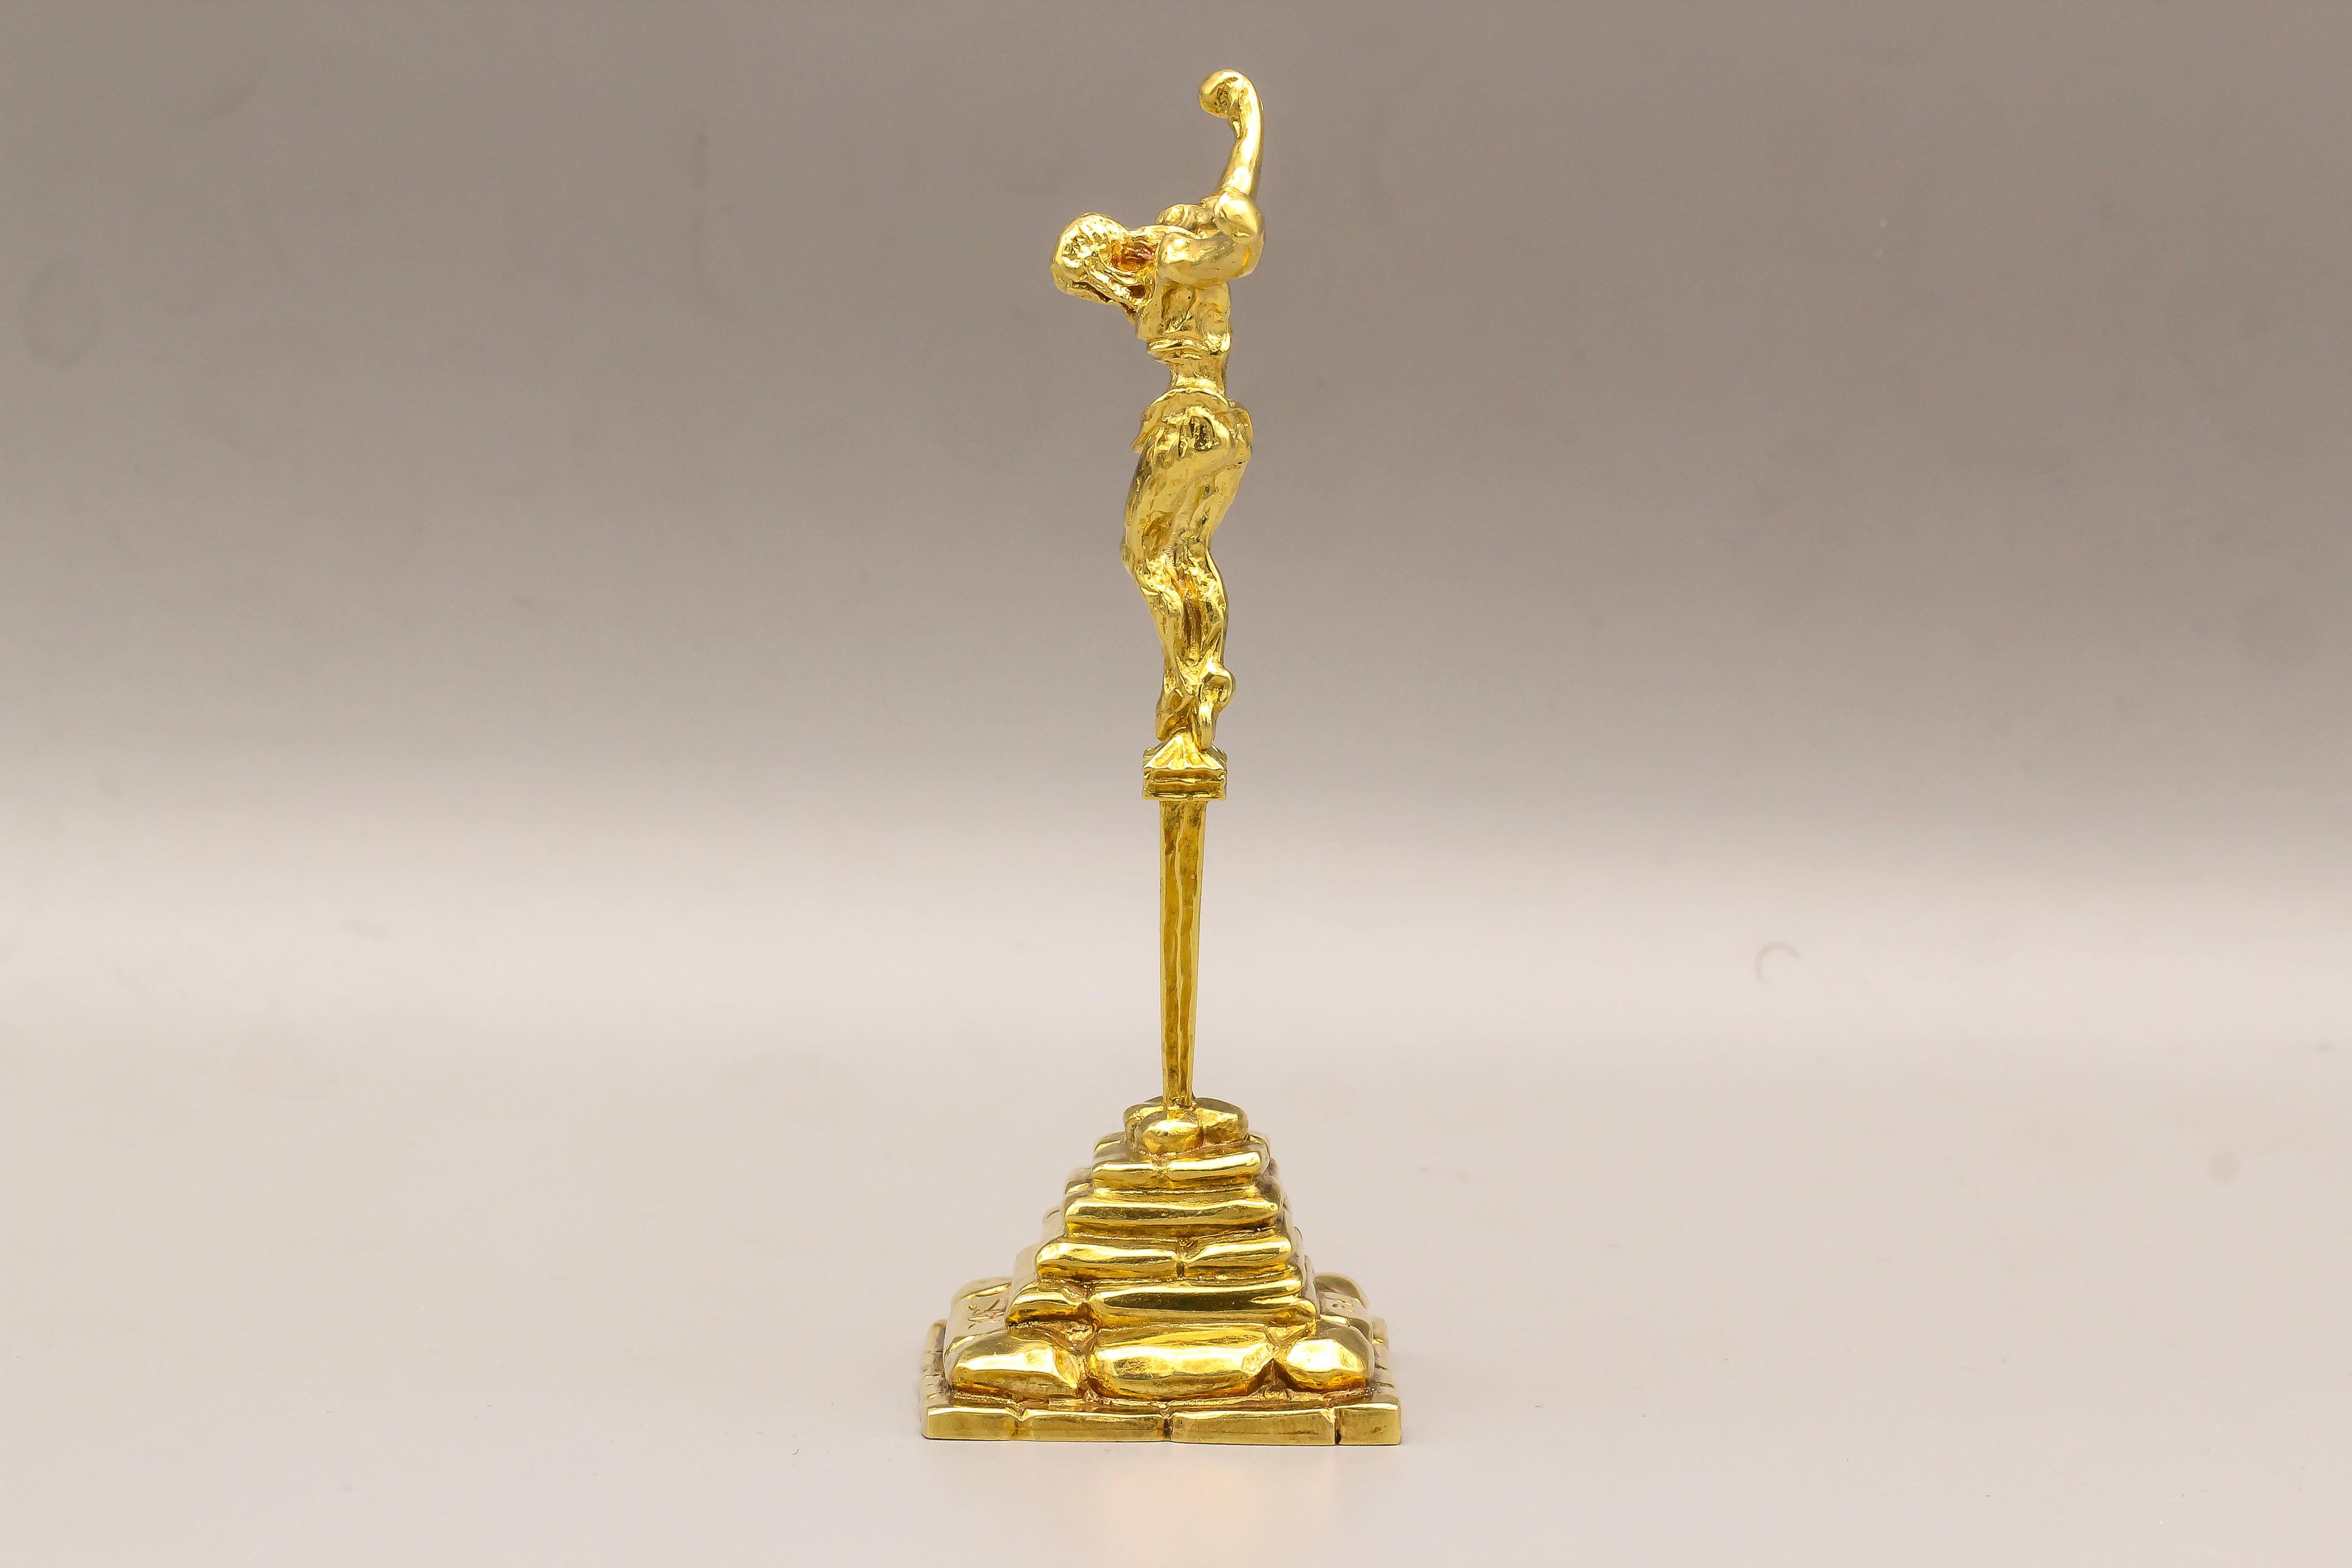 Fine and rare Dali Christ of Saint John of the Cross 18 Karat gold statuette, circa 1970s.  Signed Dali and PA.  4.5 inche tall and weighing 109.2 grams.